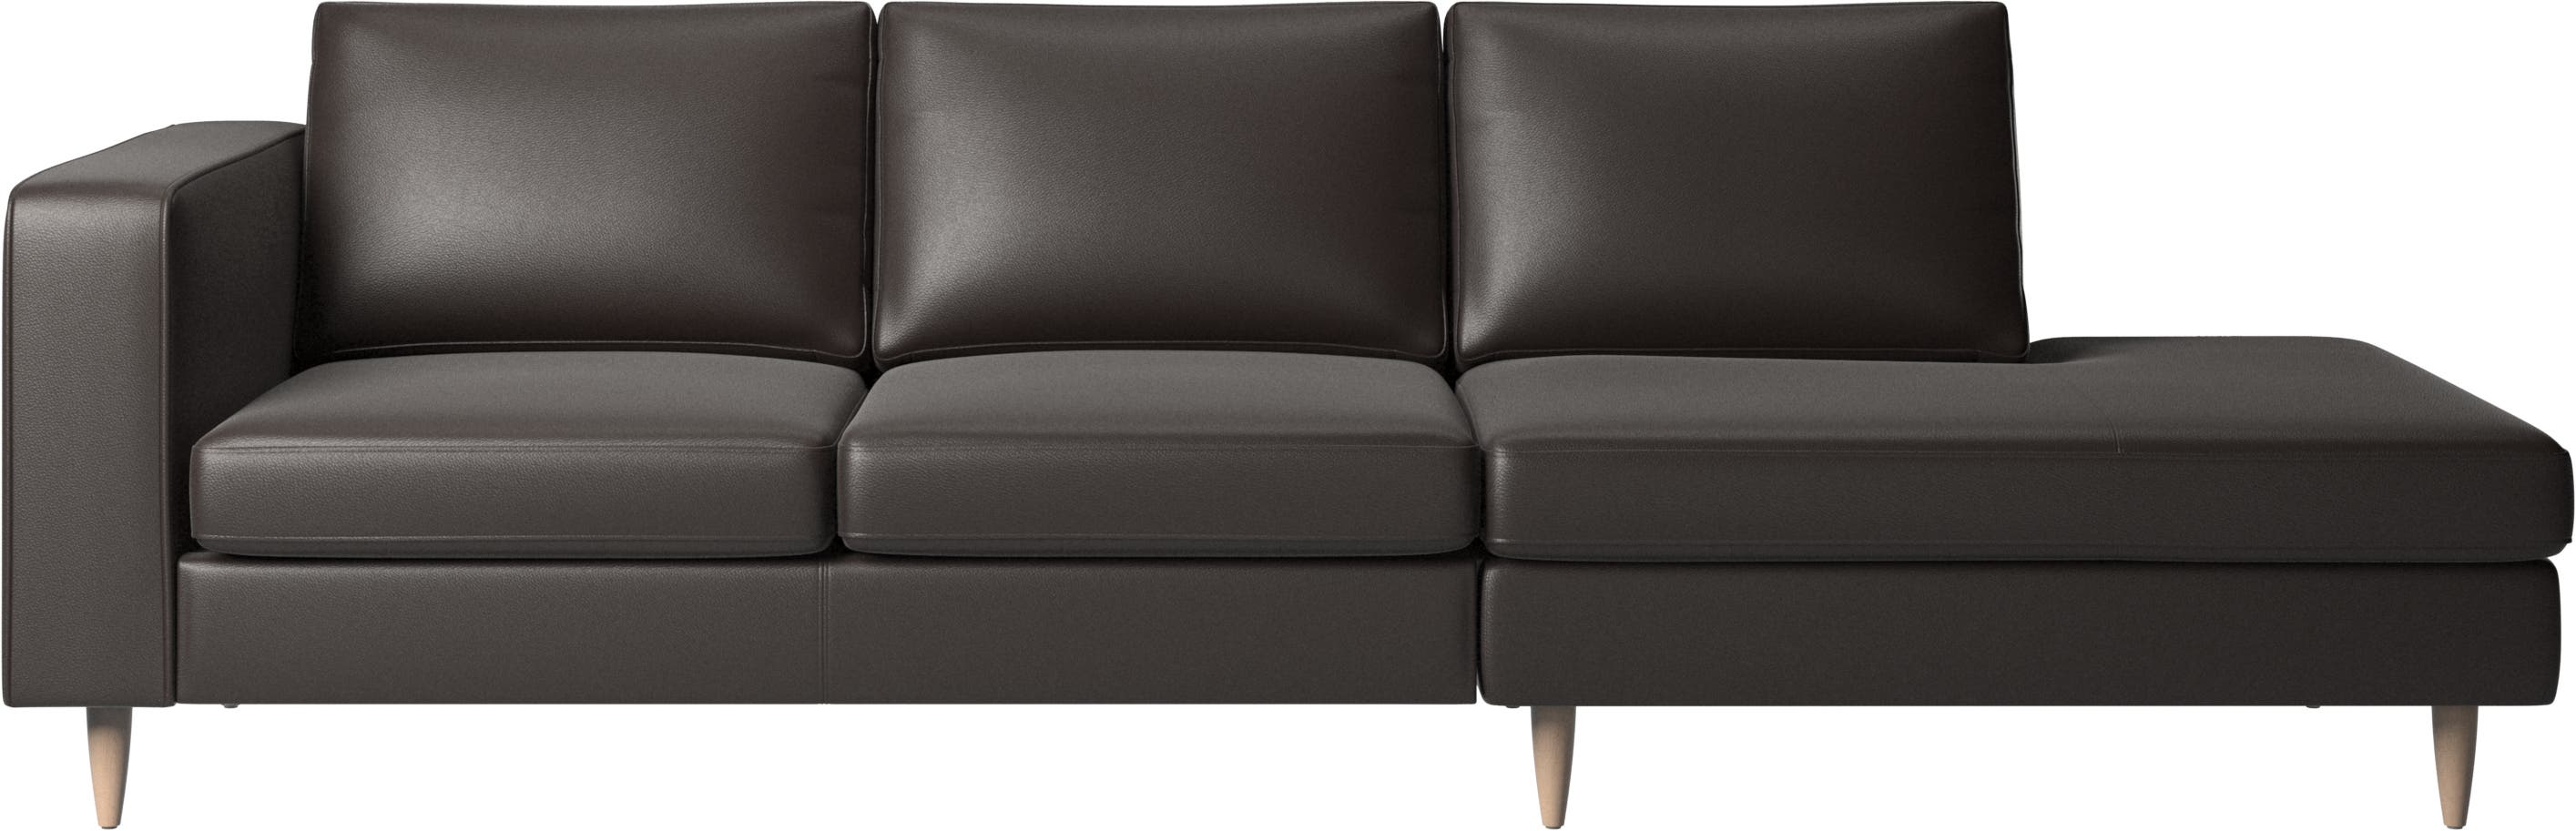 Indivi sofa with lounging unit